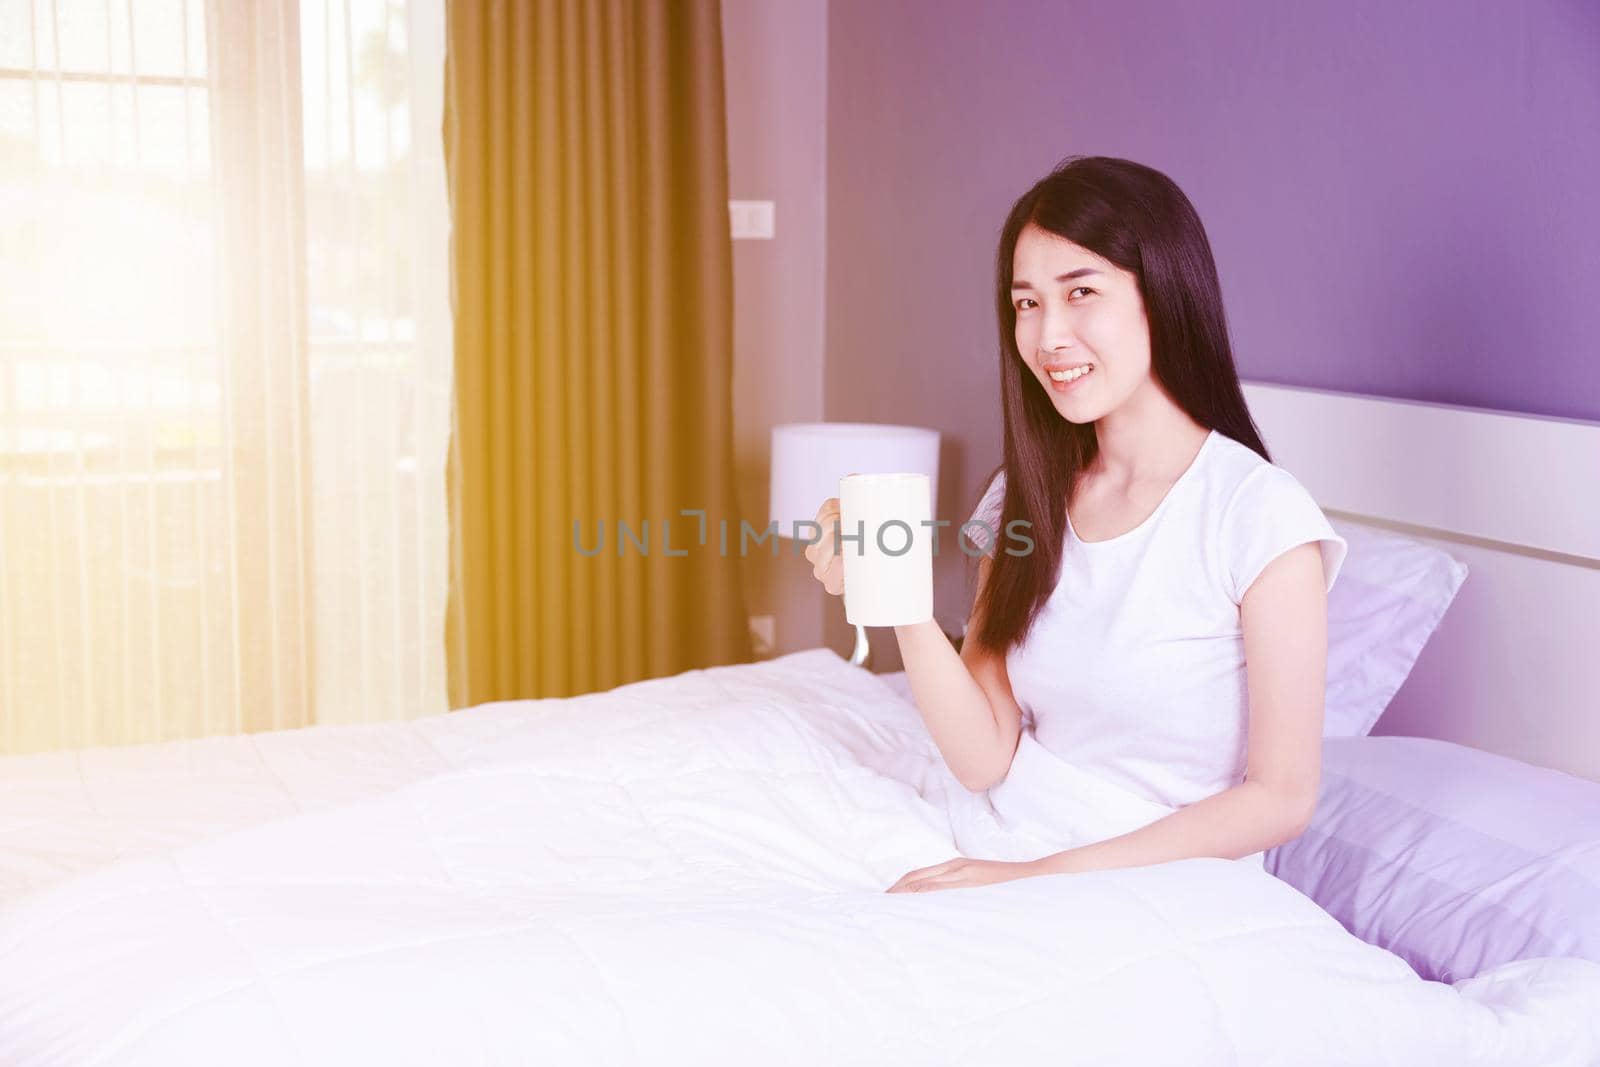 woman on bed with a cup of coffee in the bedroom